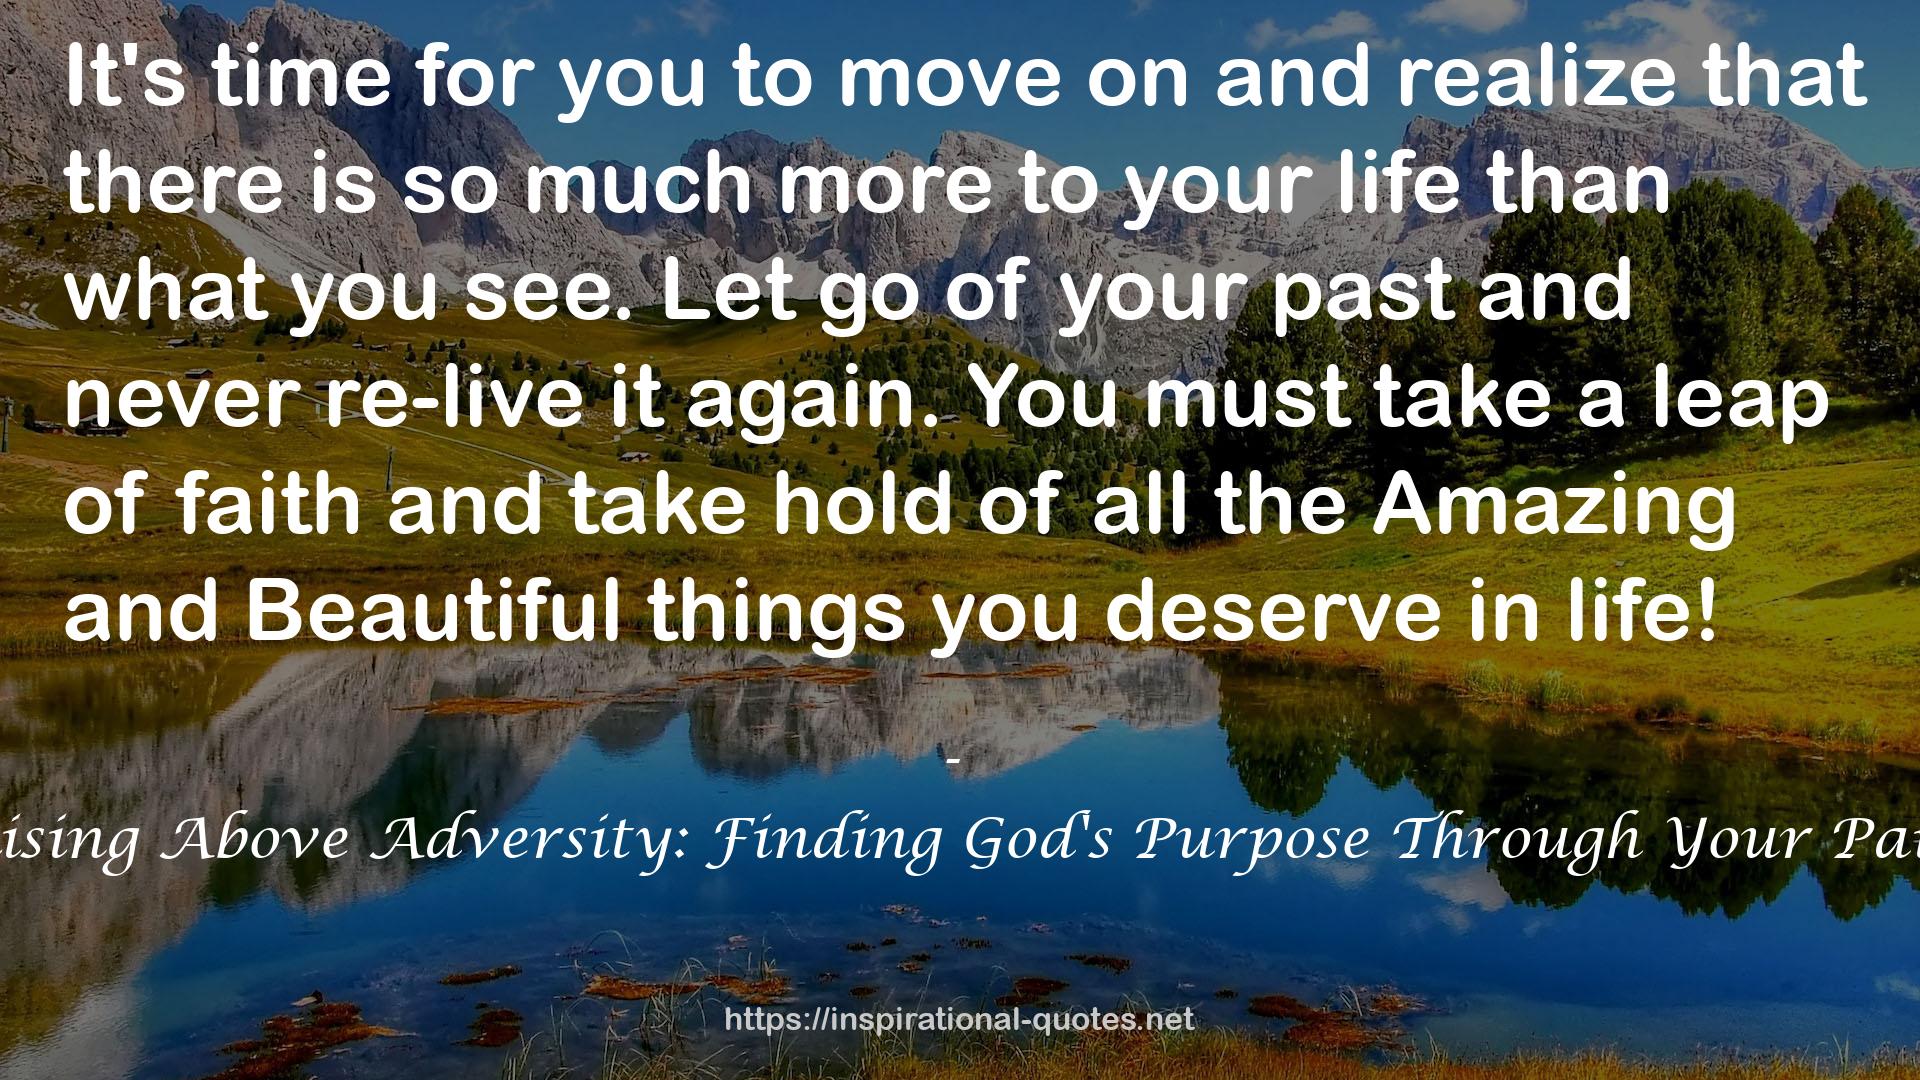 Rising Above Adversity: Finding God's Purpose Through Your Pain QUOTES